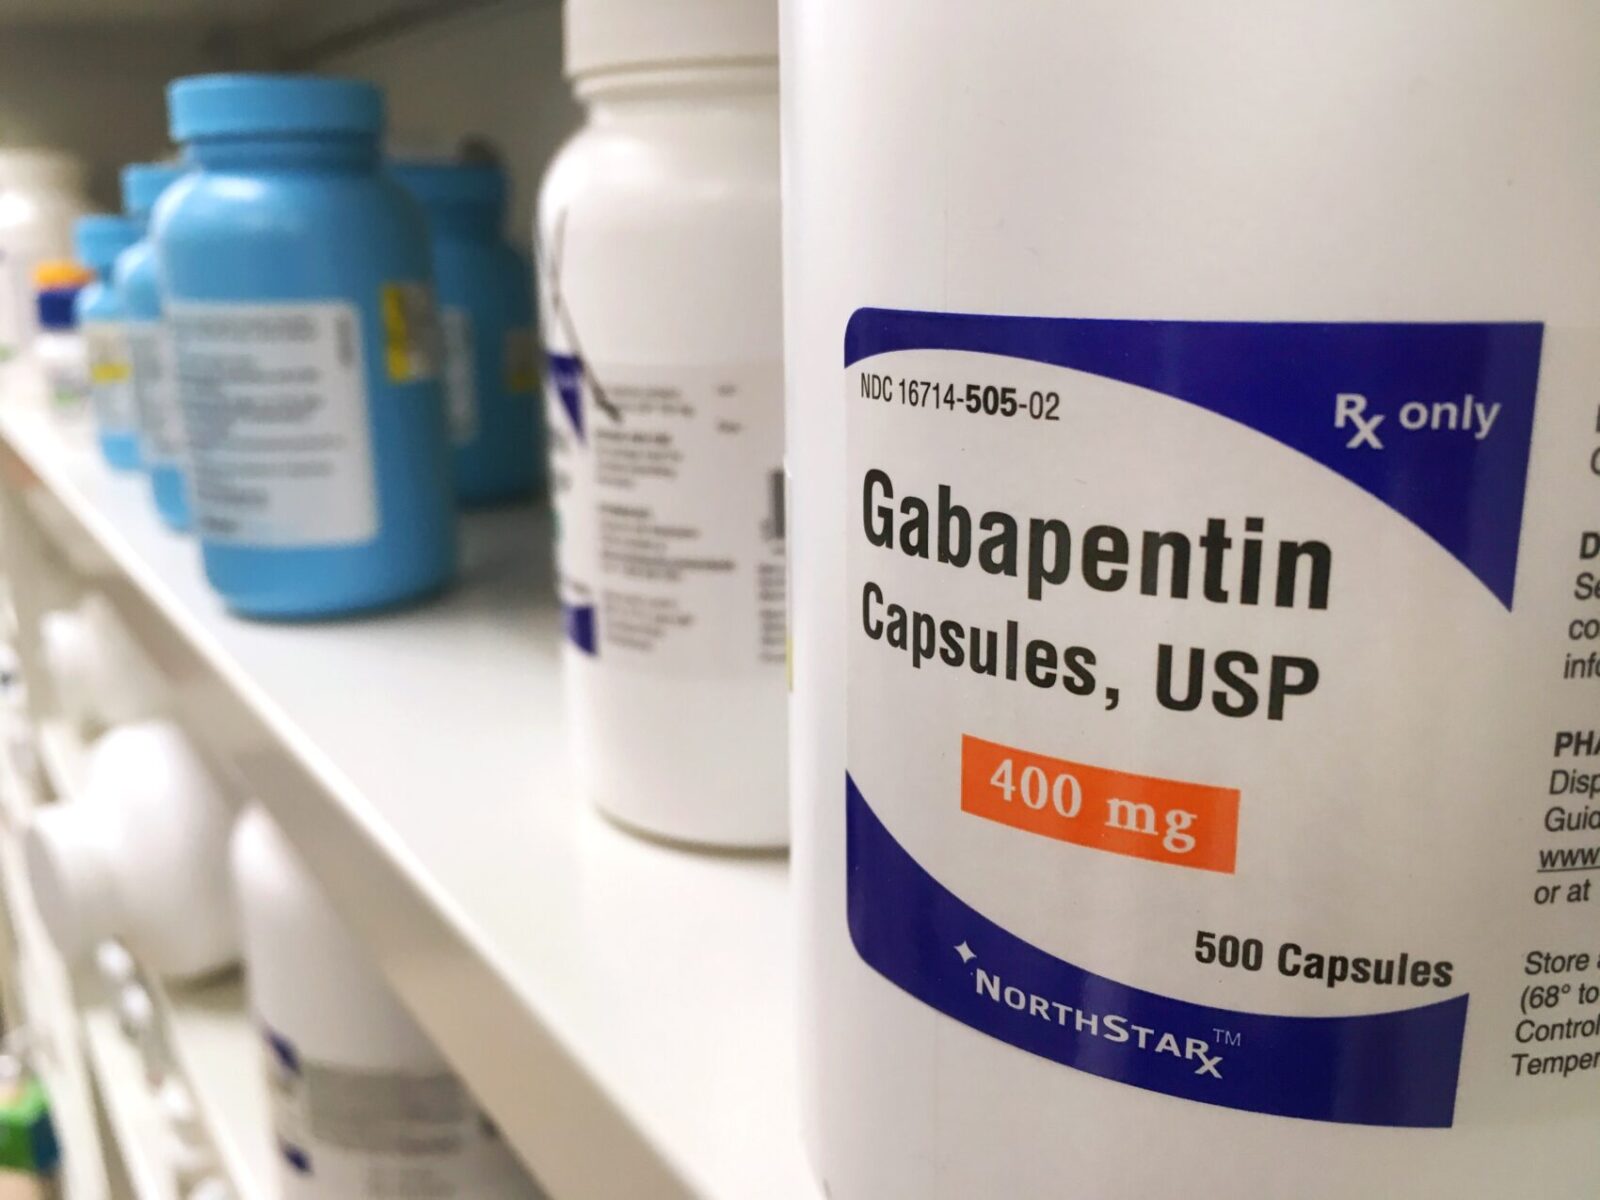 What Drugs Should Not Be Taken With Gabapentin?